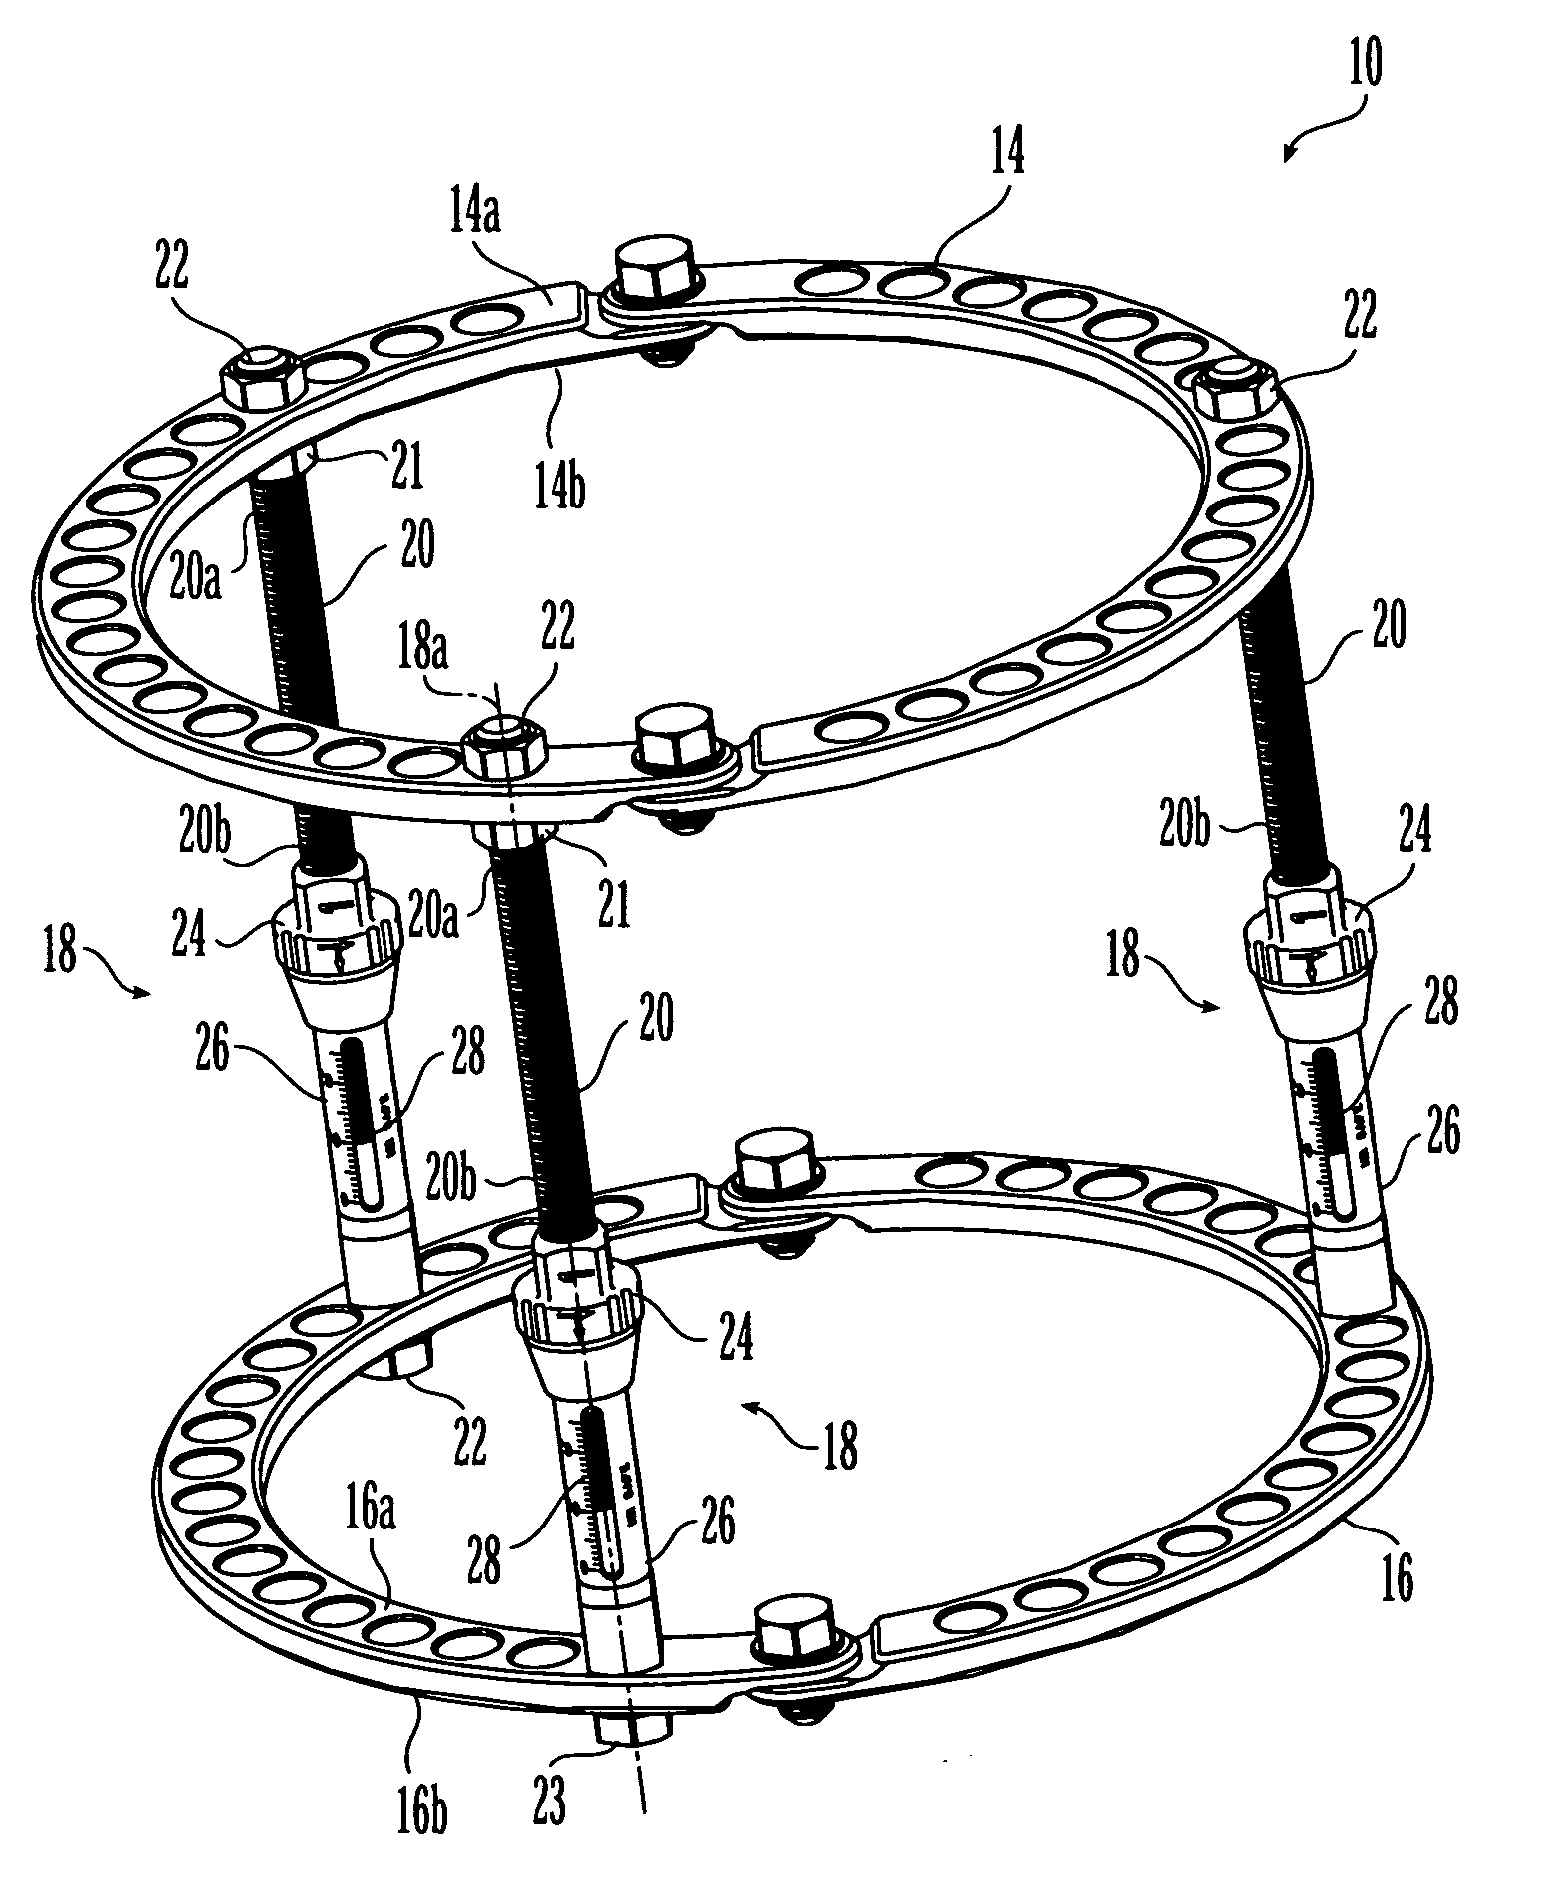 External fixation system and method of use